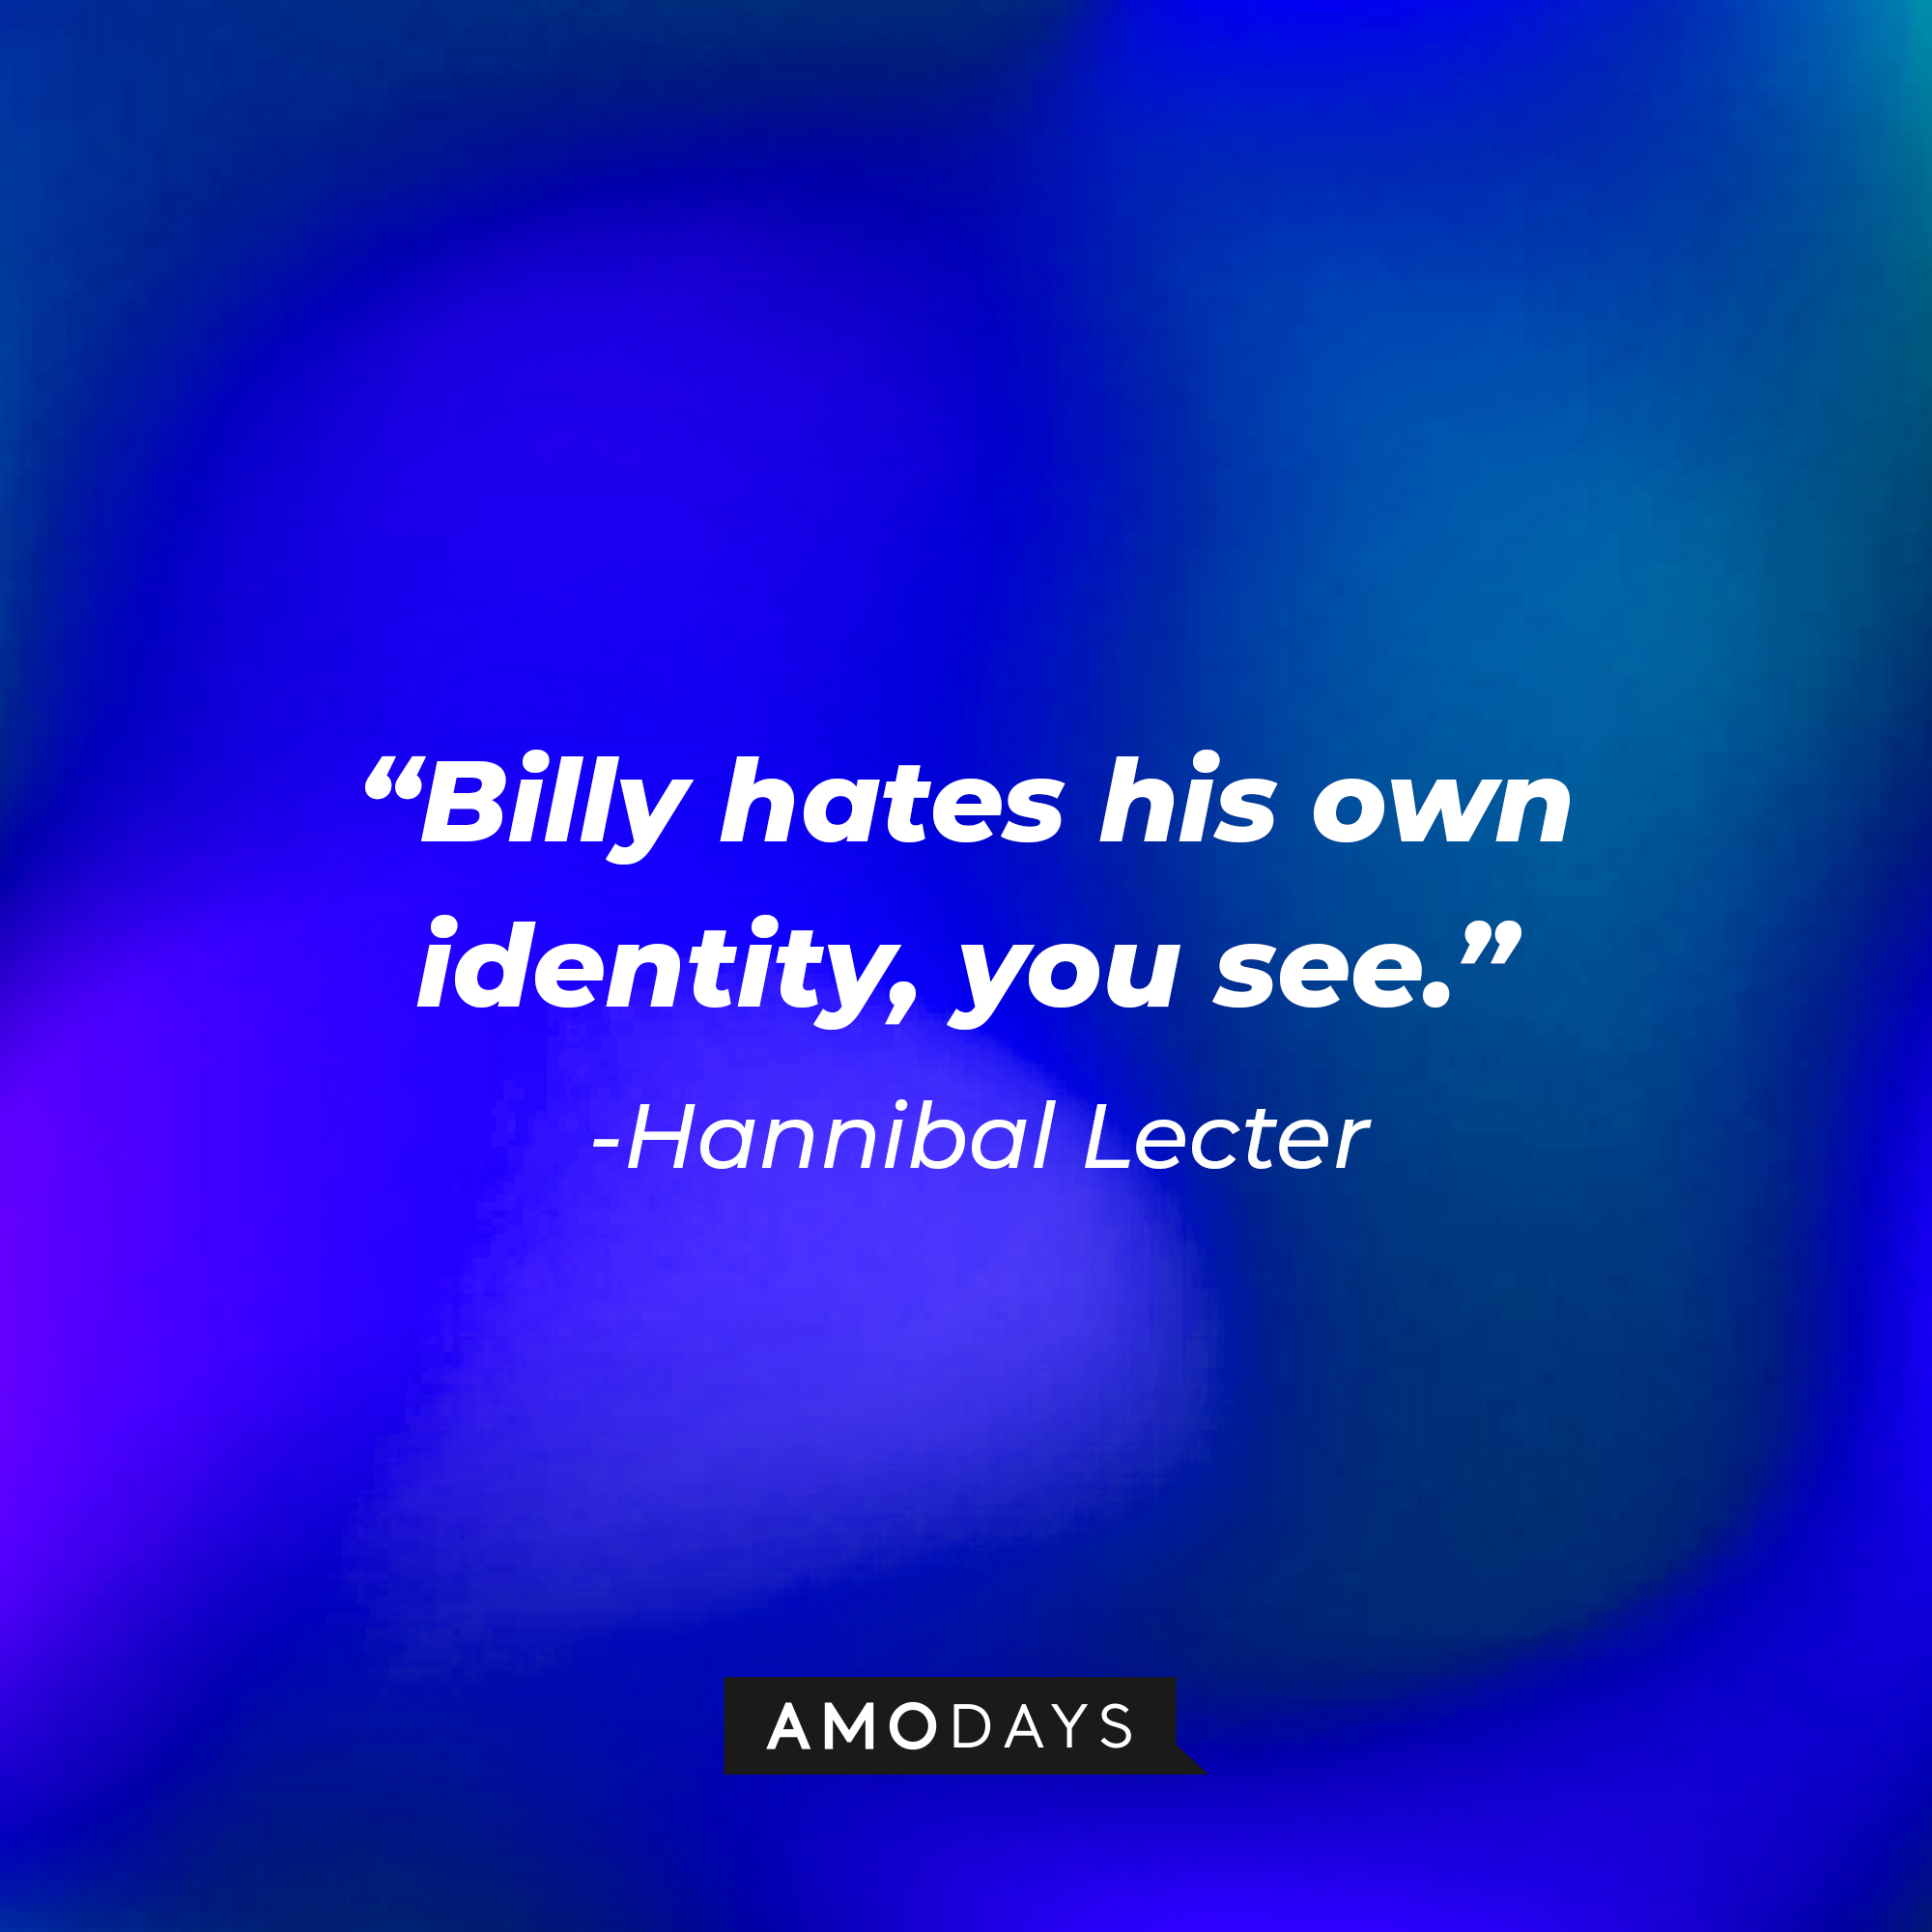 Hannibal Lecter's quote from "The Silence of the Lambs:" "Billy hates his own identity, you see." | Source: AmoDays